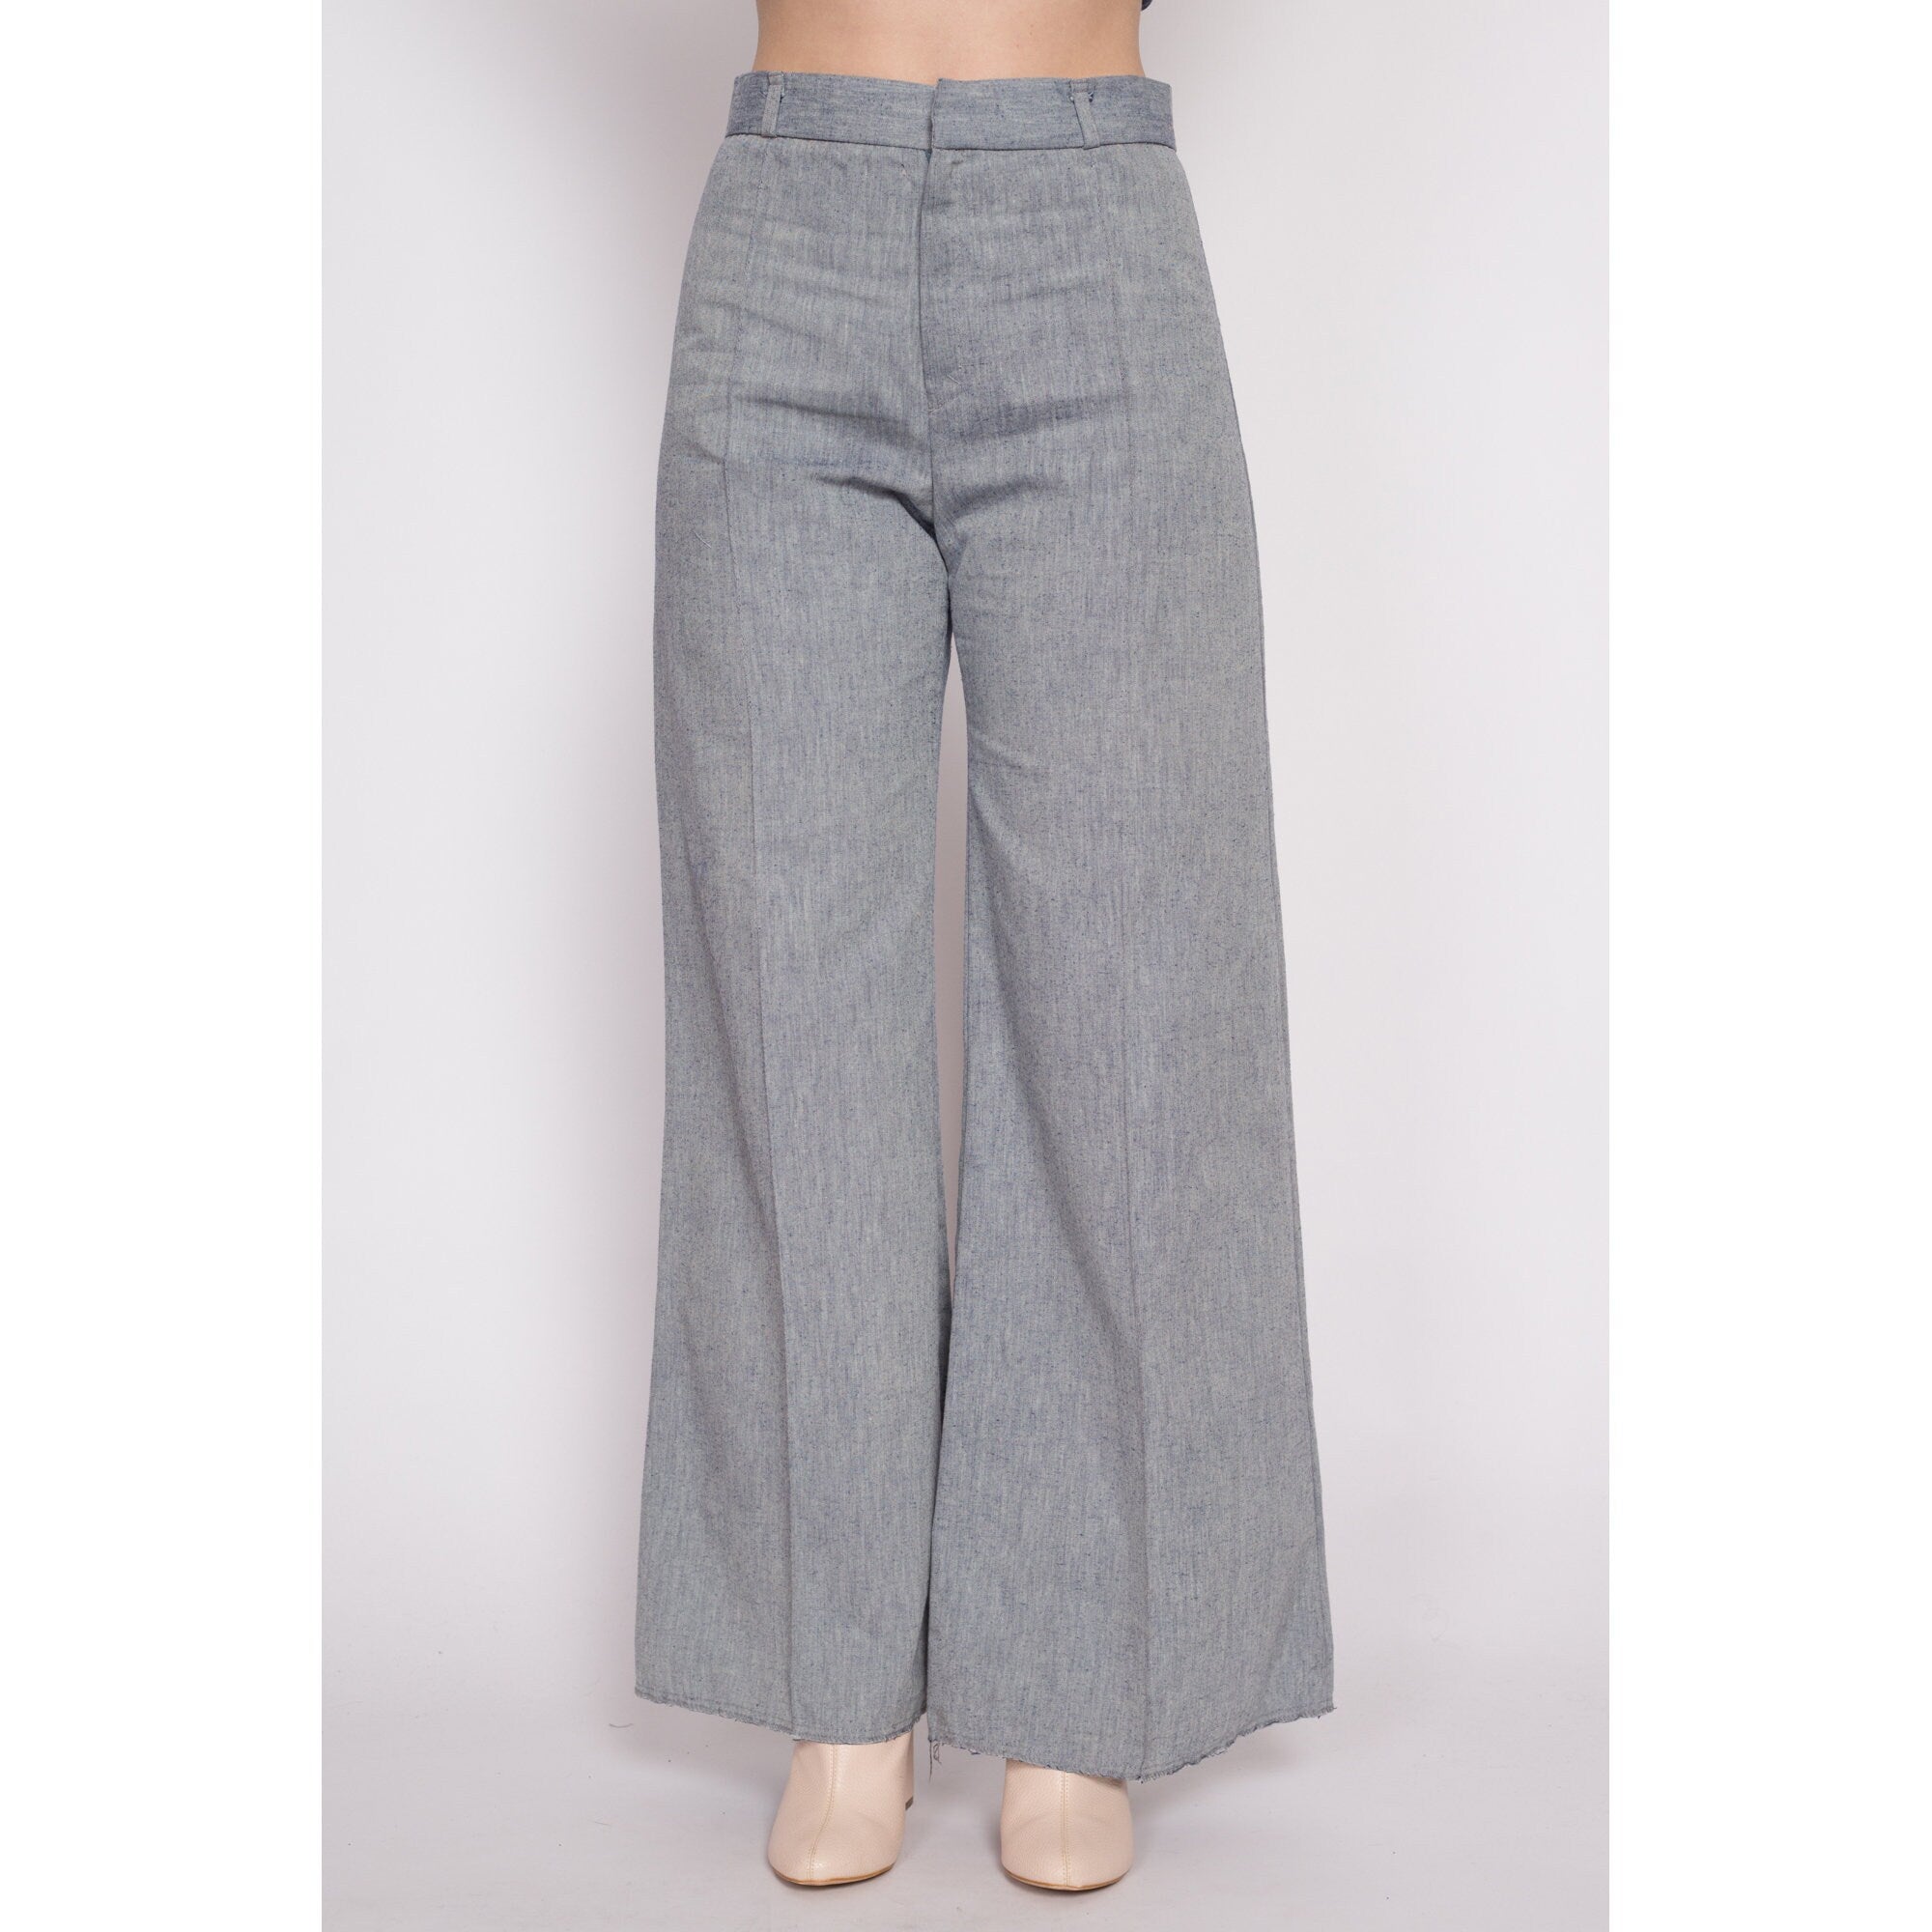 The Frolic pinstripe wide leg trouser co-ord in charcoal grey | ASOS